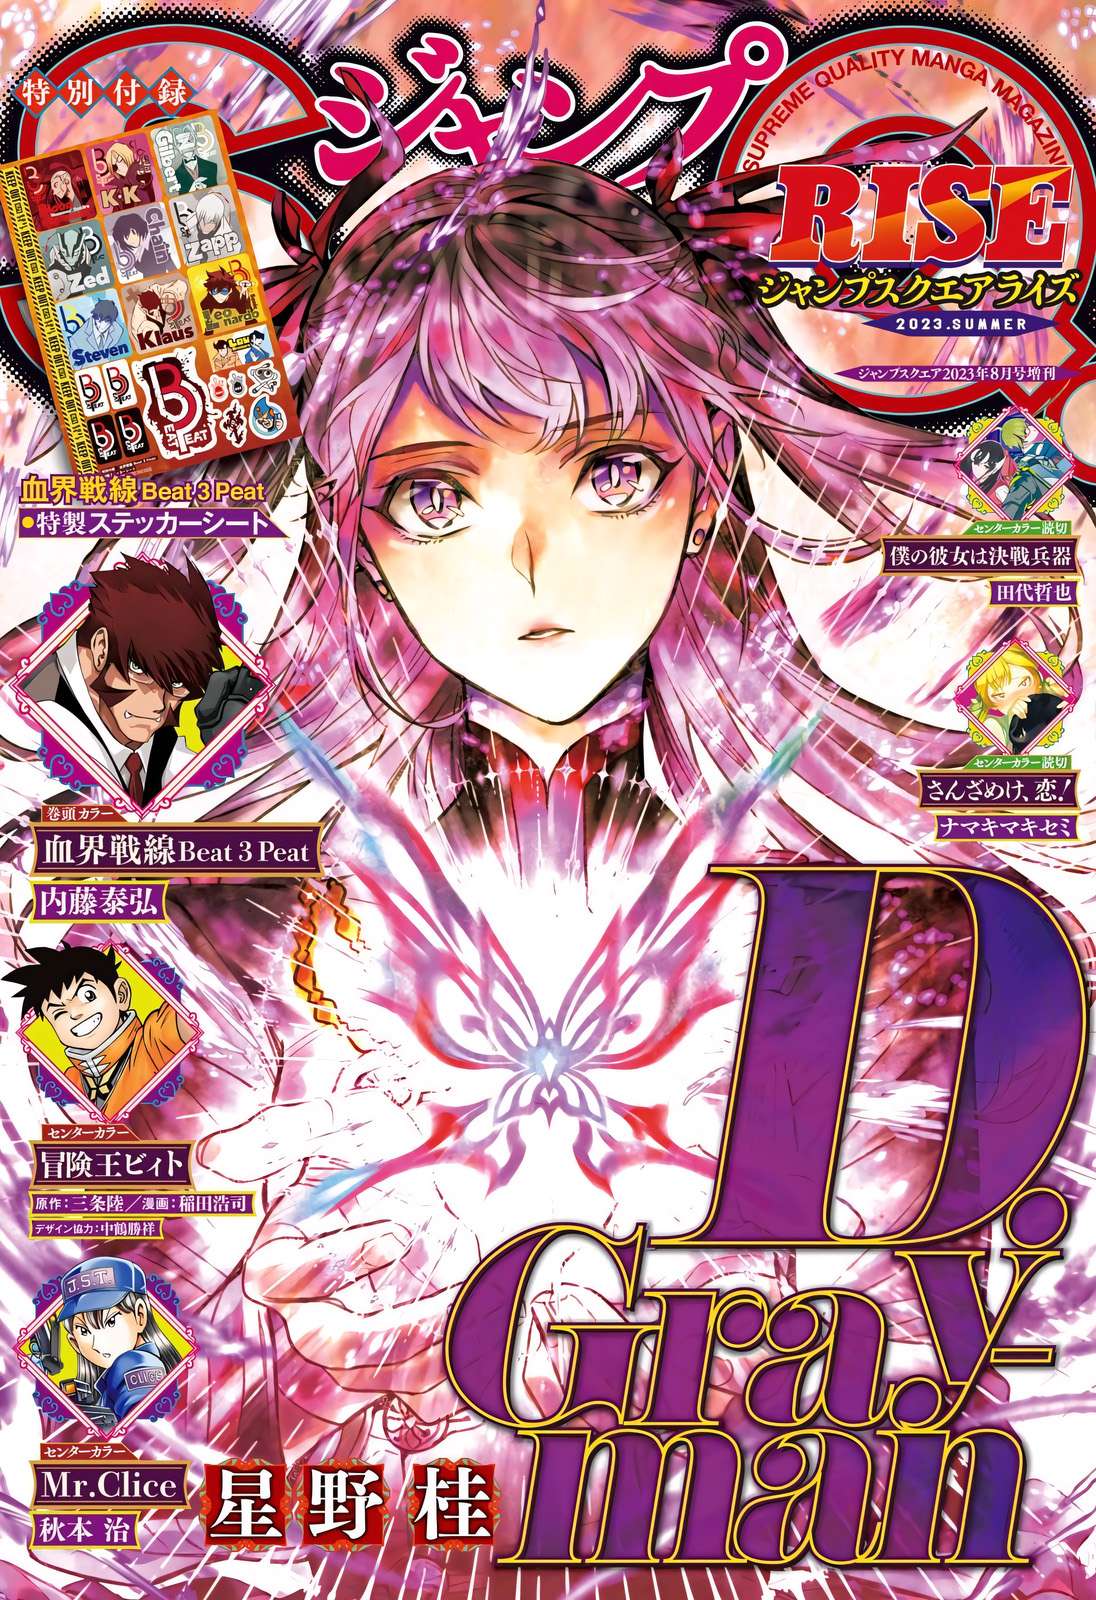 D.Gray-man chapter 248 page 2